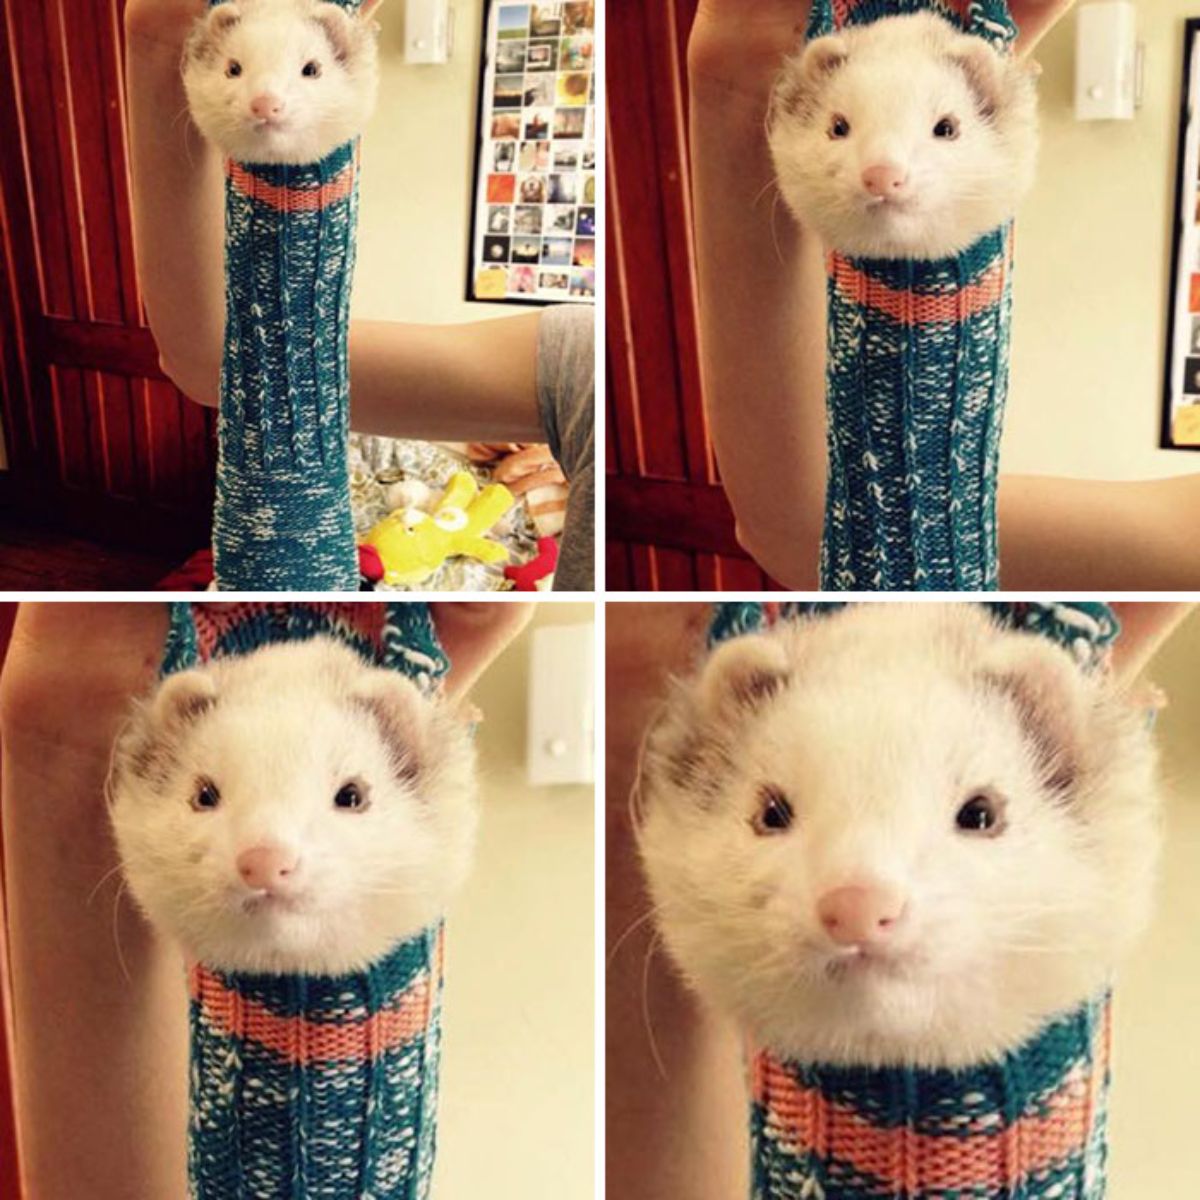 4 photos closing in on a white ferret's face with the ferret stuck inside a blue white and red sock